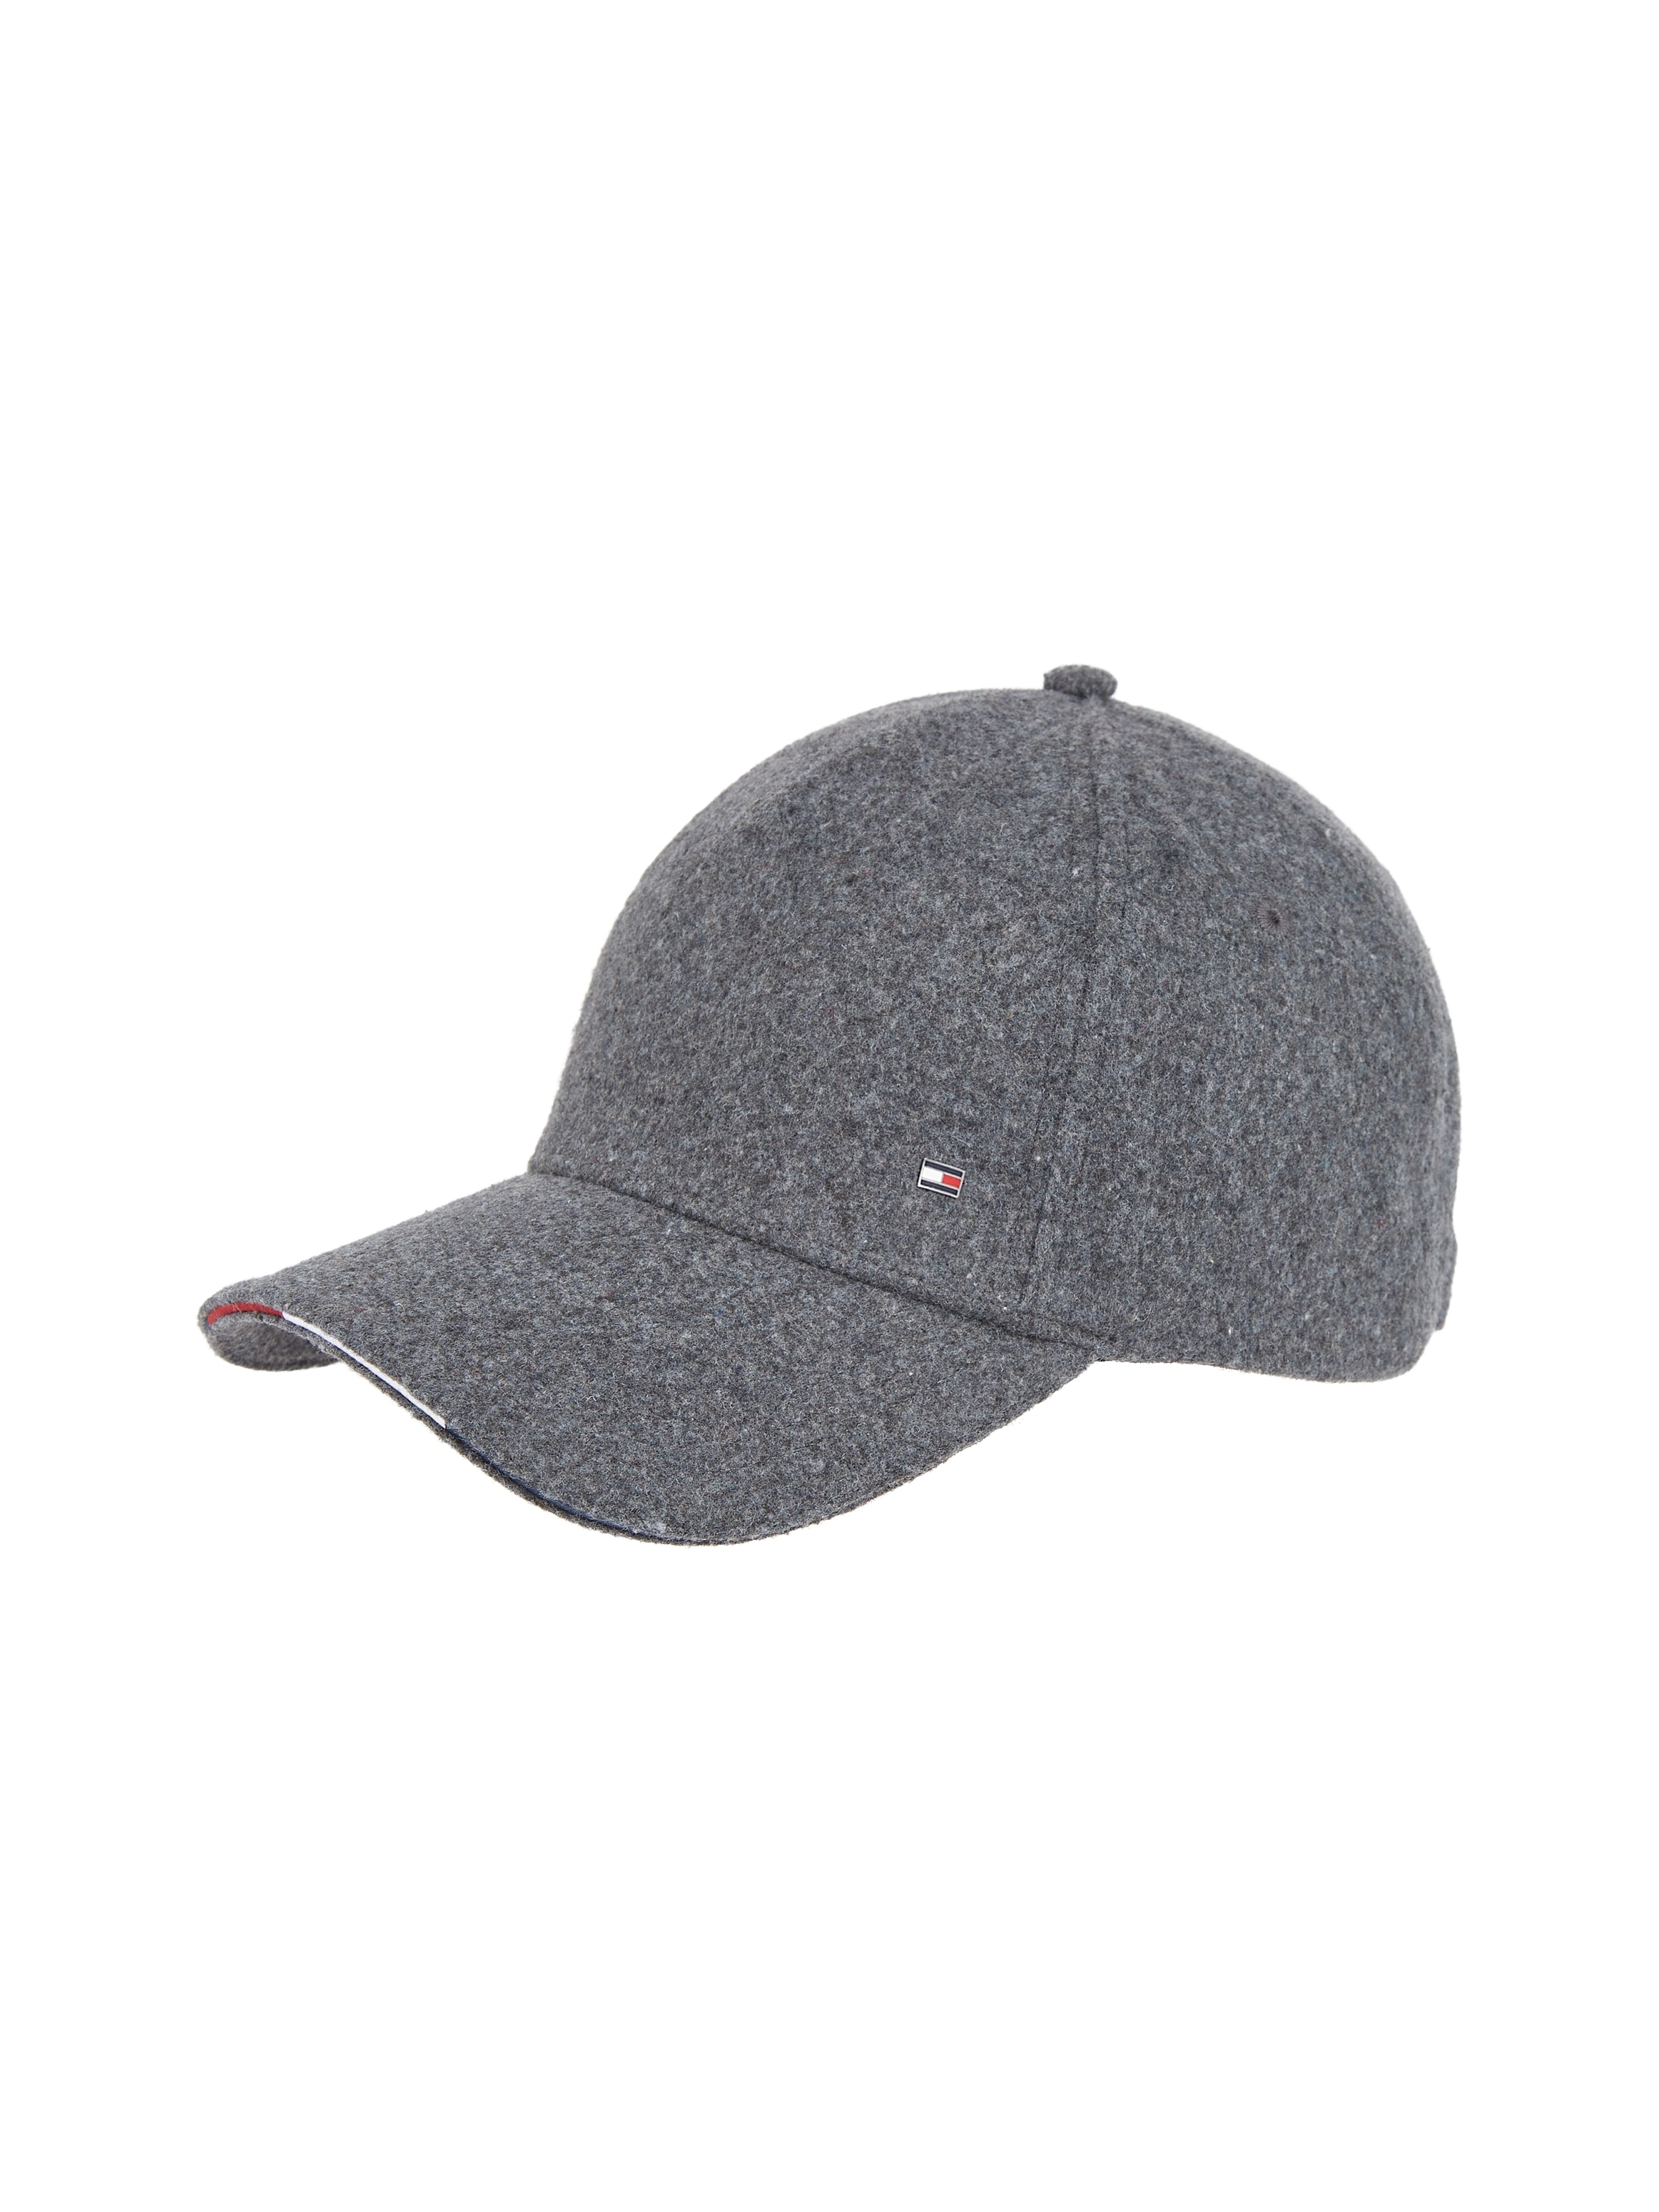 Tape mit Tommy- CORPORATE bei online CAP«, und Tommy Hilfiger Baseball »ELEVATED UNIVERSAL Cap Flag